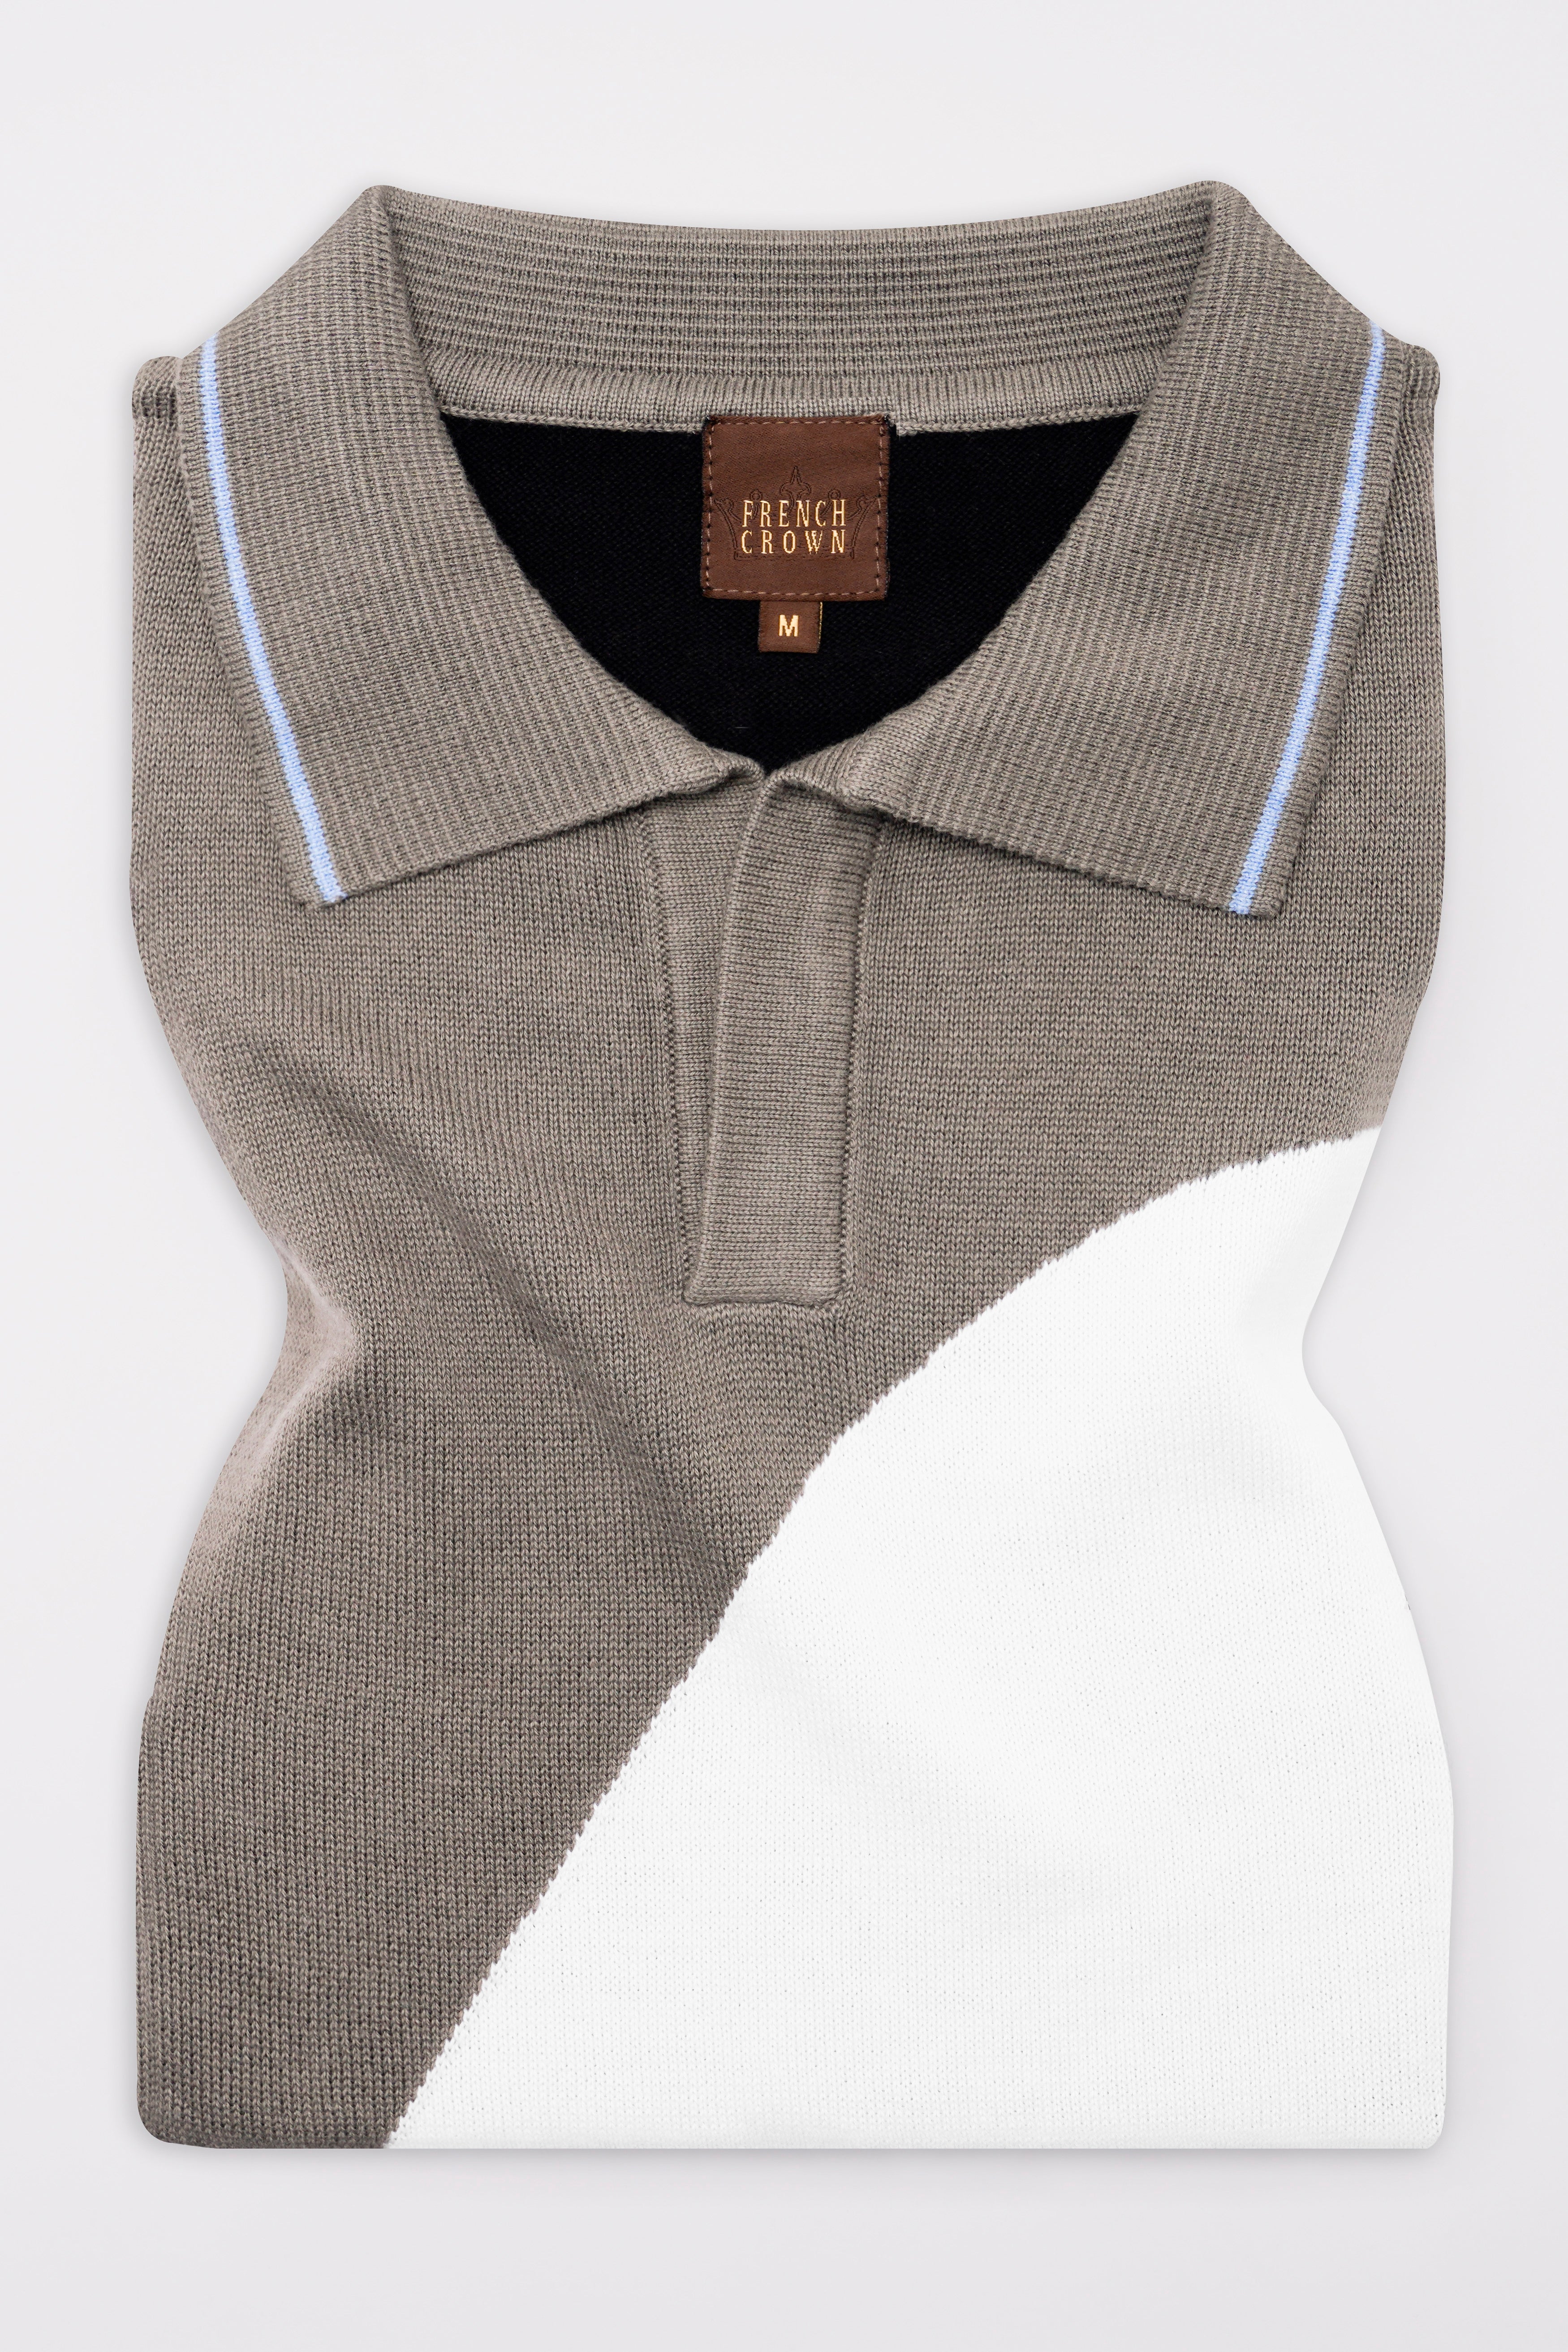 Beaver Brown with White and Glacier Blue Premium Cotton Flat Knit Polo TS931-S, TS931-M, TS931-L, TS931-XL, TS931-XXL